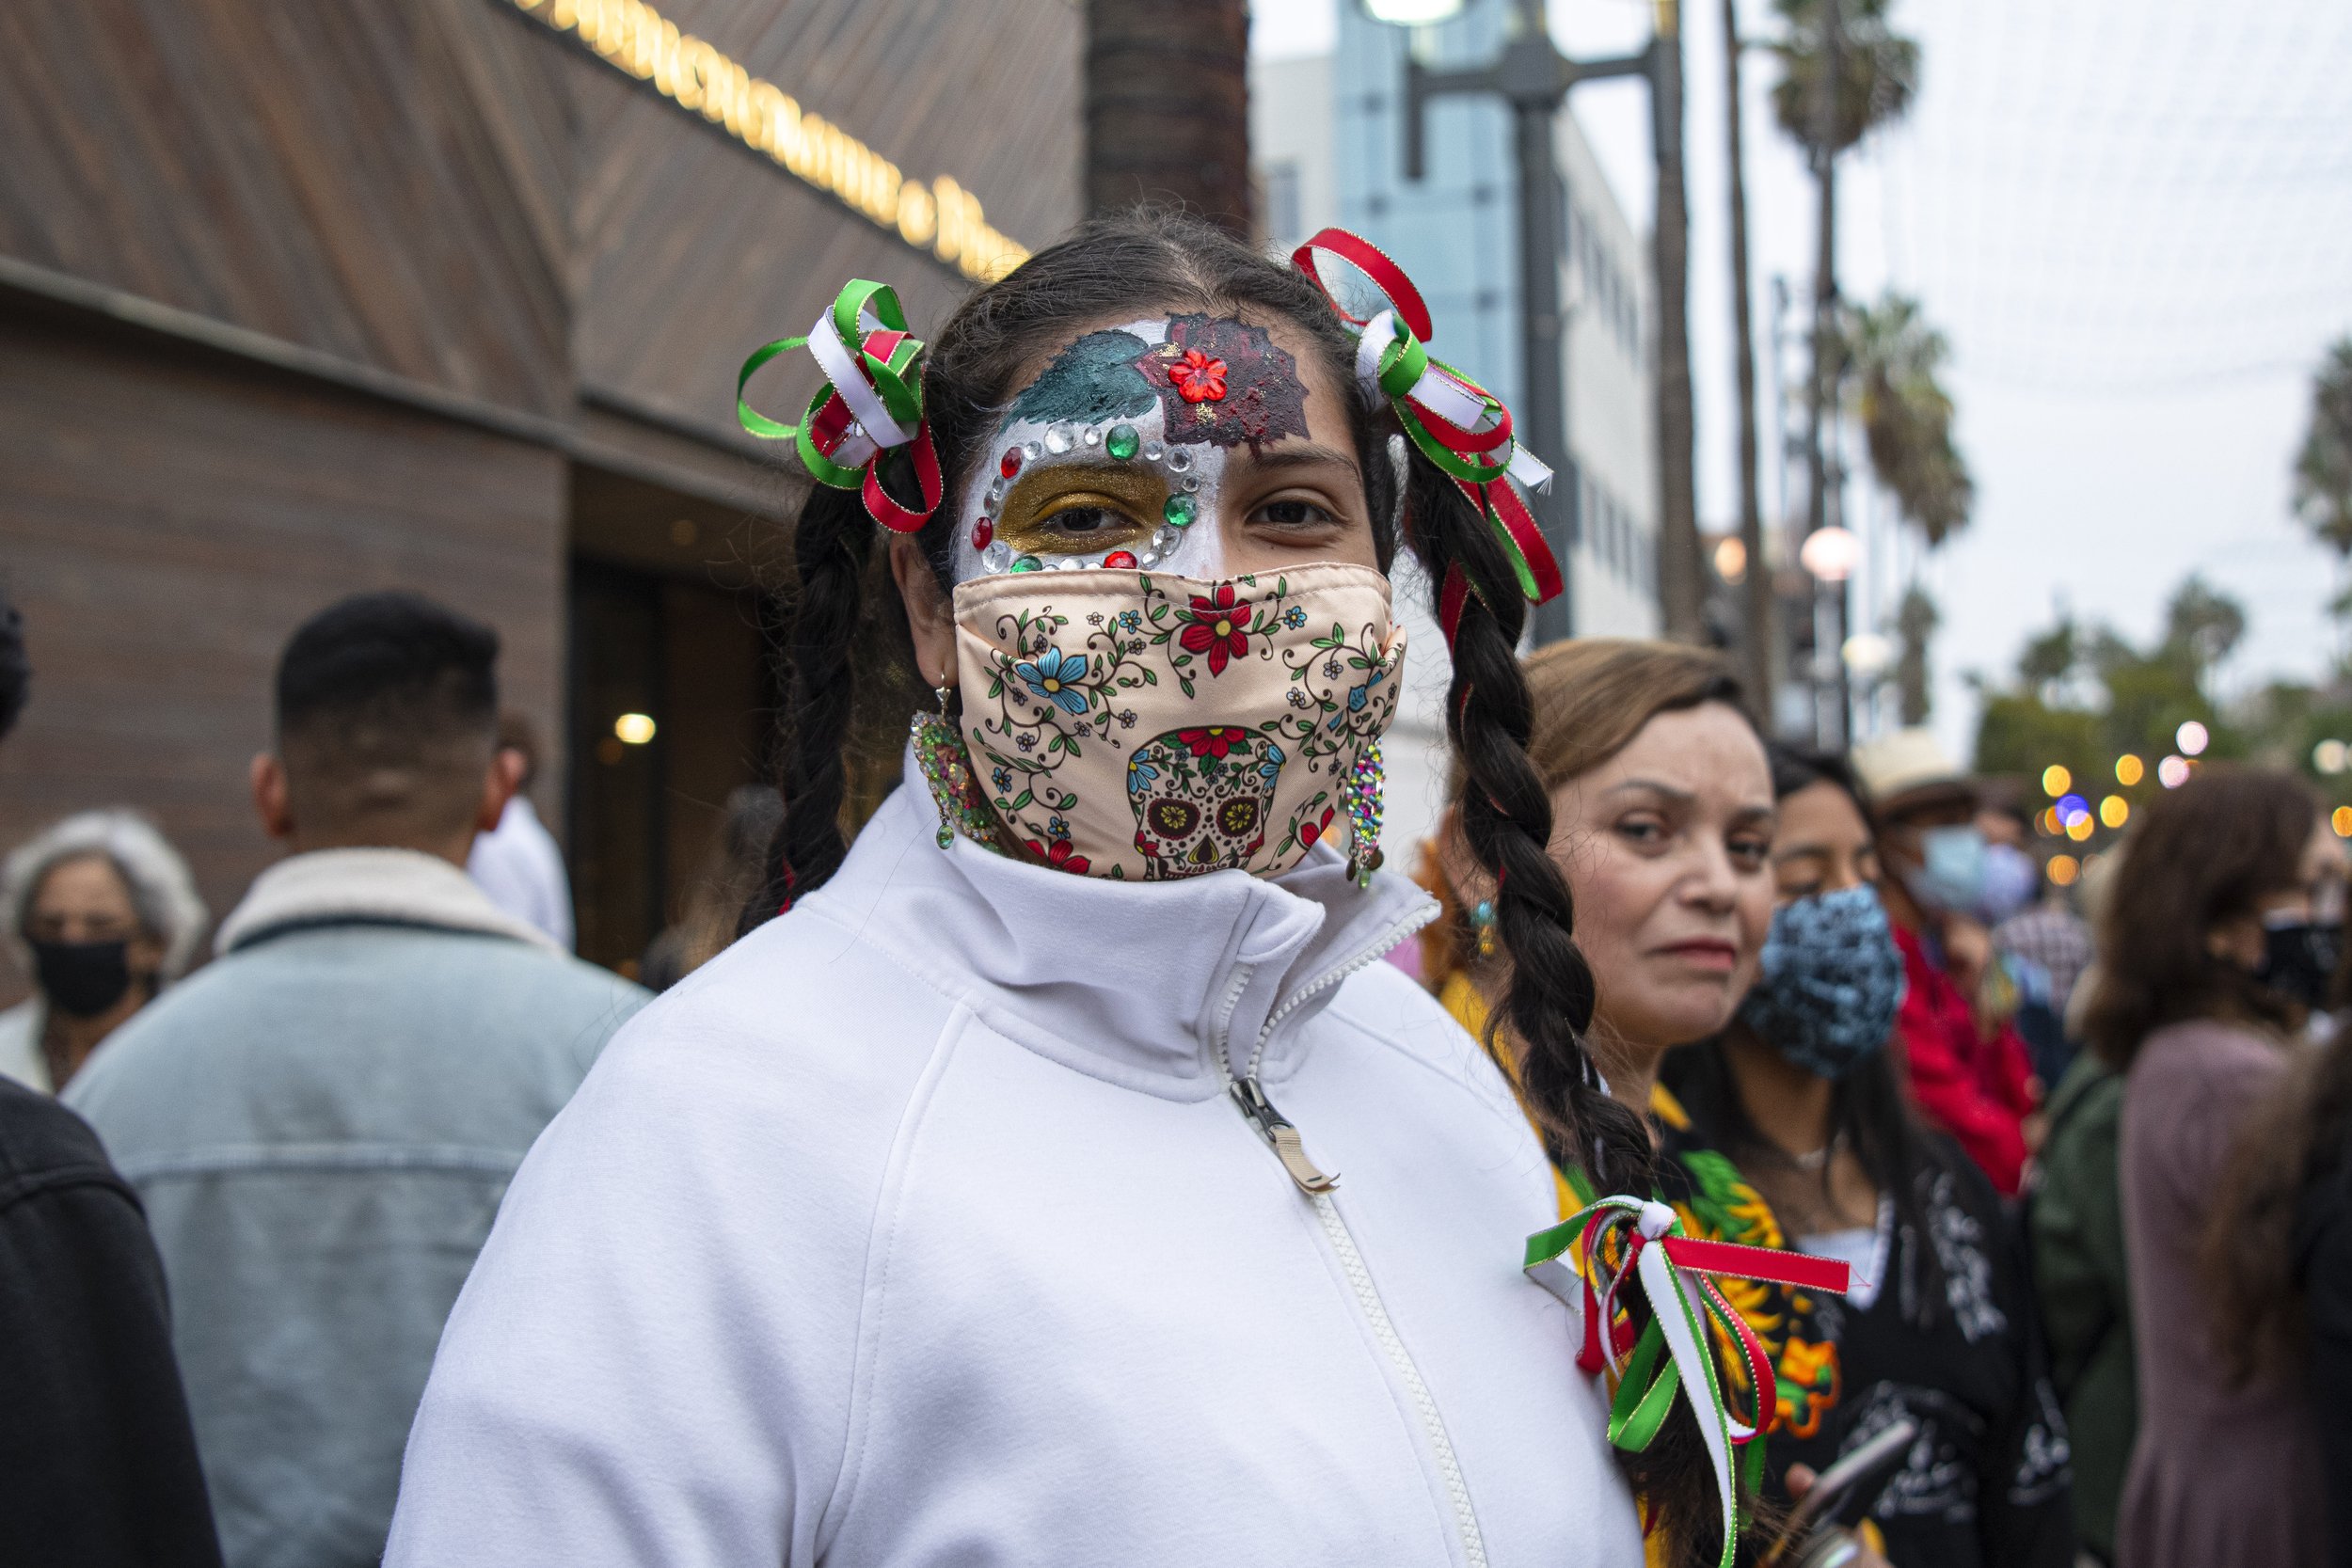  A Dia delos Muertos (Day of the Dead) performer smiles for a picture as she tries to calm her nerves before her performance at the Day of the Dead celebration being held at the Third Street Promenade in Santa Monica, Calif. (Jon Putman | The Corsair